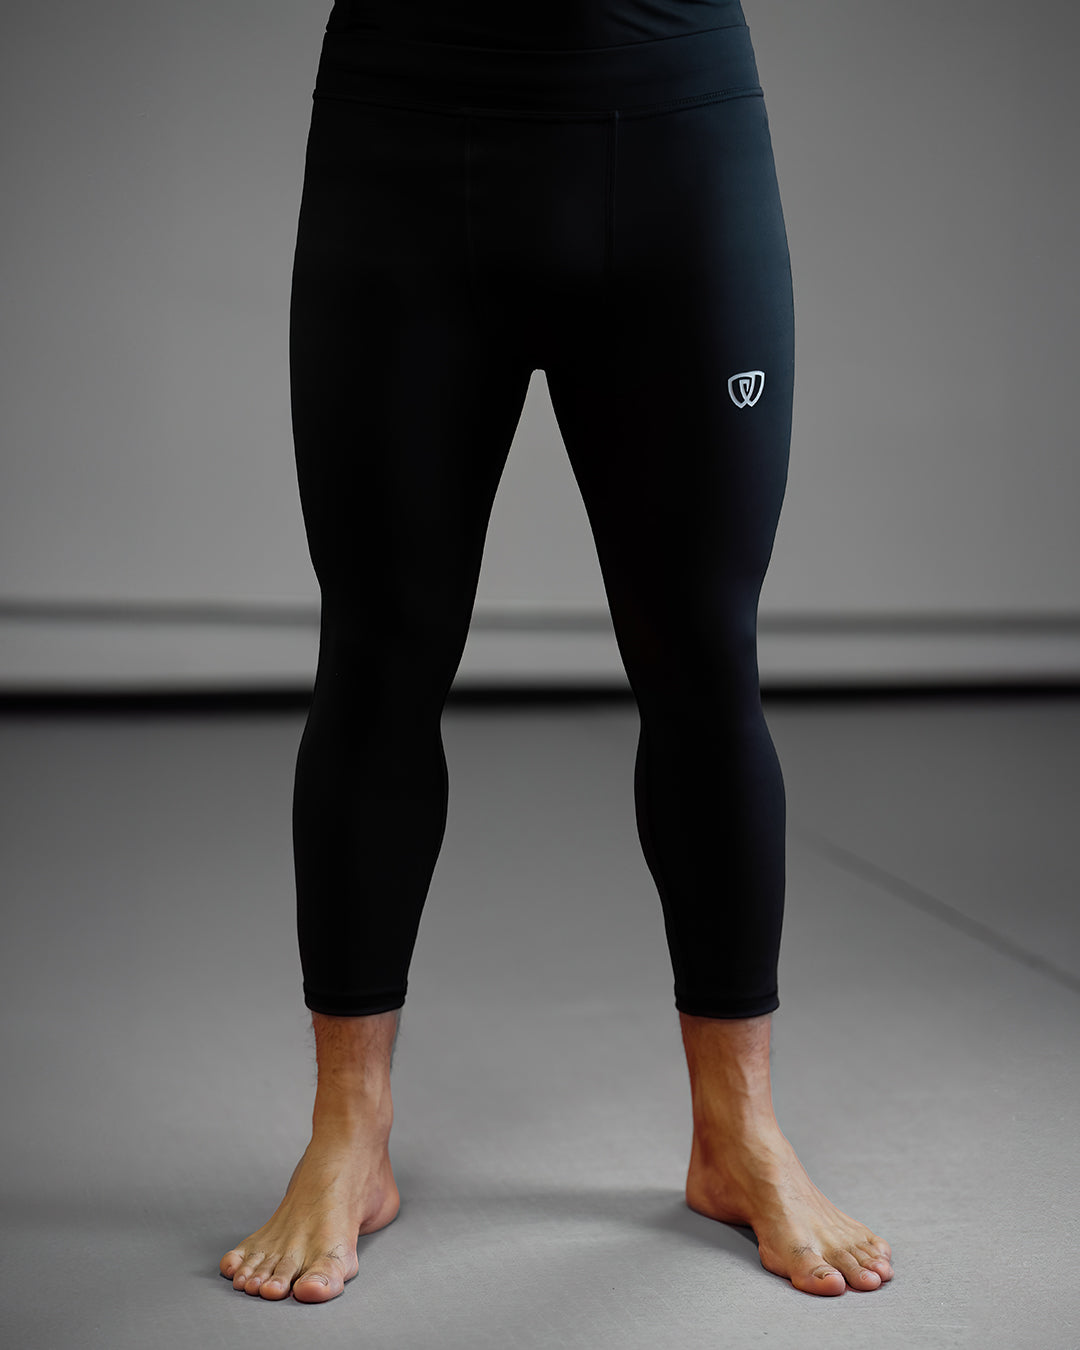 Phalanx jiu jitsu tights for BJJ and MMA, compression pants perfect for No Gi Jiu Jitsu, Brazilian Jiu-Jitsu and Mixed Martial Arts - all grappling, wrestling, surfing, yoga - all athletics! Workout clothes for a wide range of everyday sports, gym wear and exercise activities.